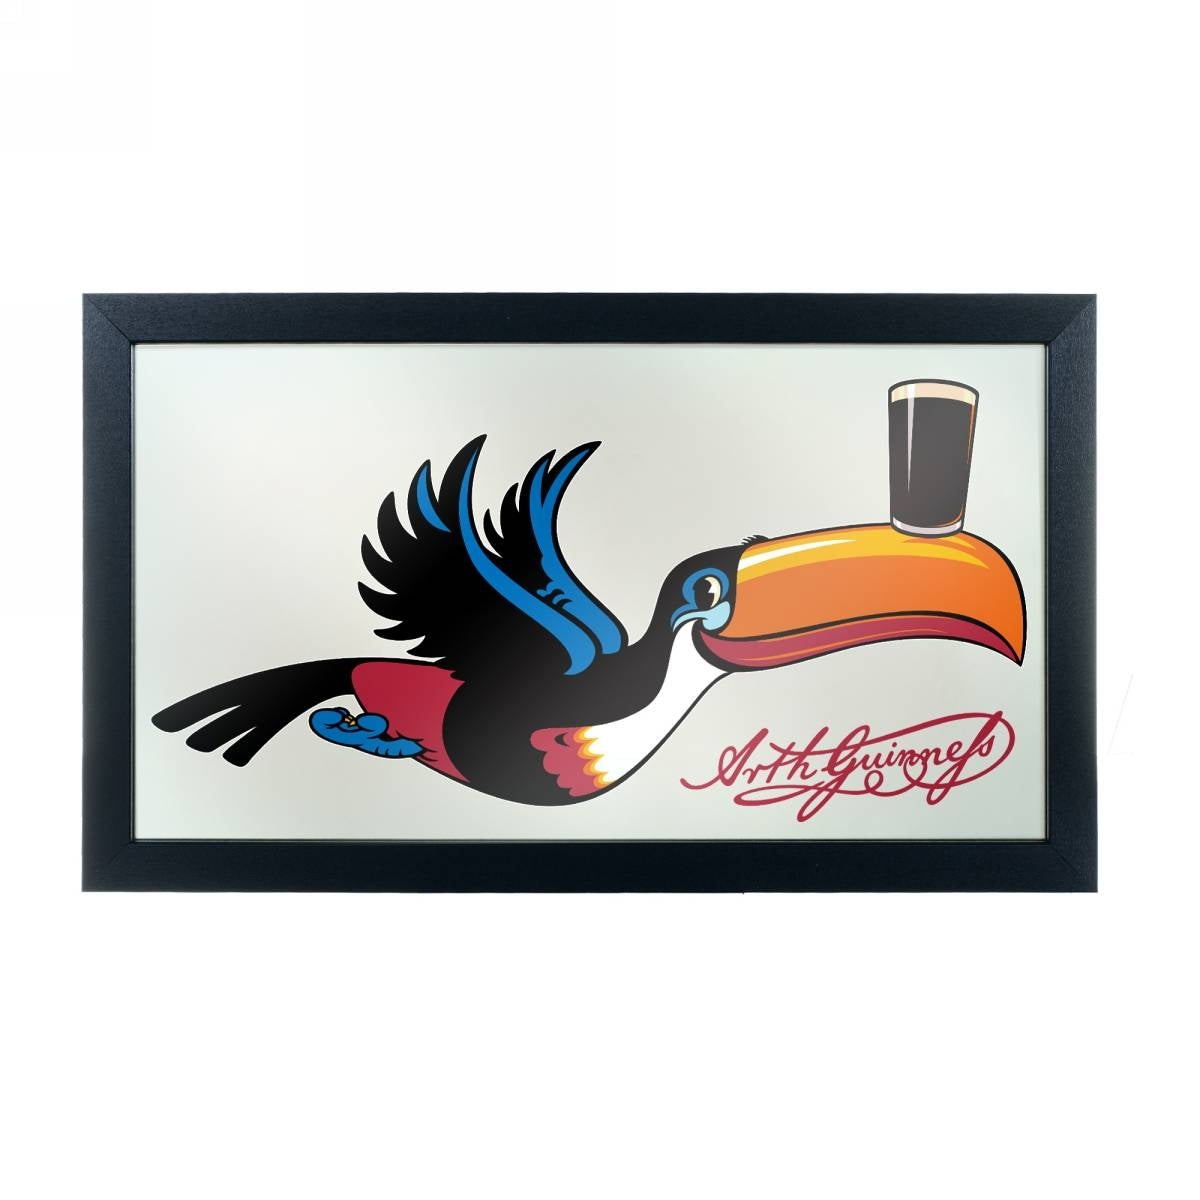 Guinness Framed Mirror Wall Plaque 15 x 26 Inches - Toucan